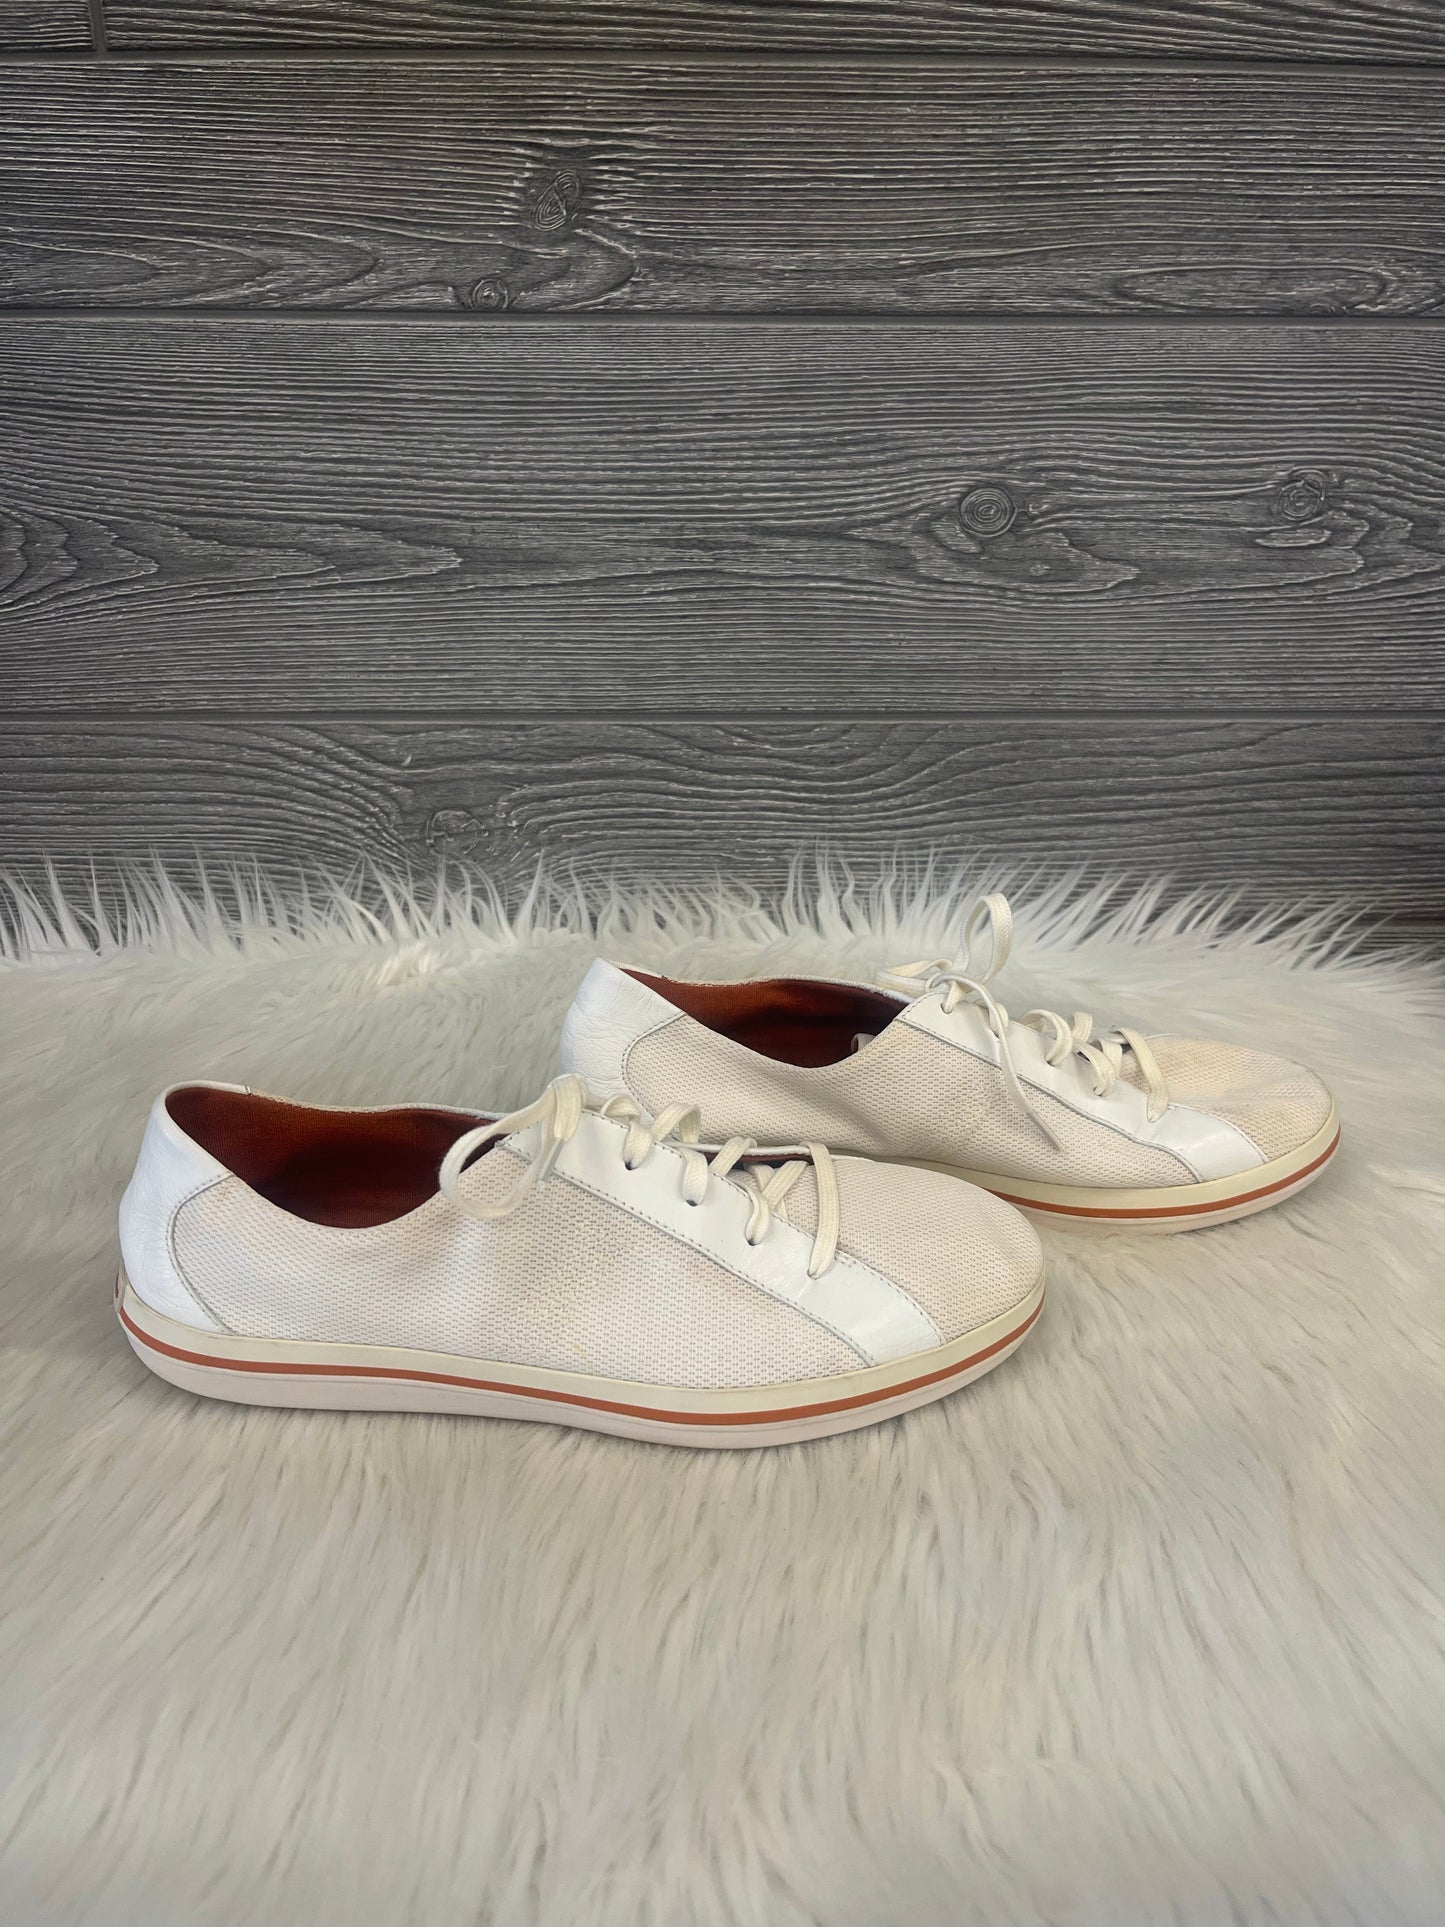 Shoes Flats By Tommy Bahama  Size: 9.5